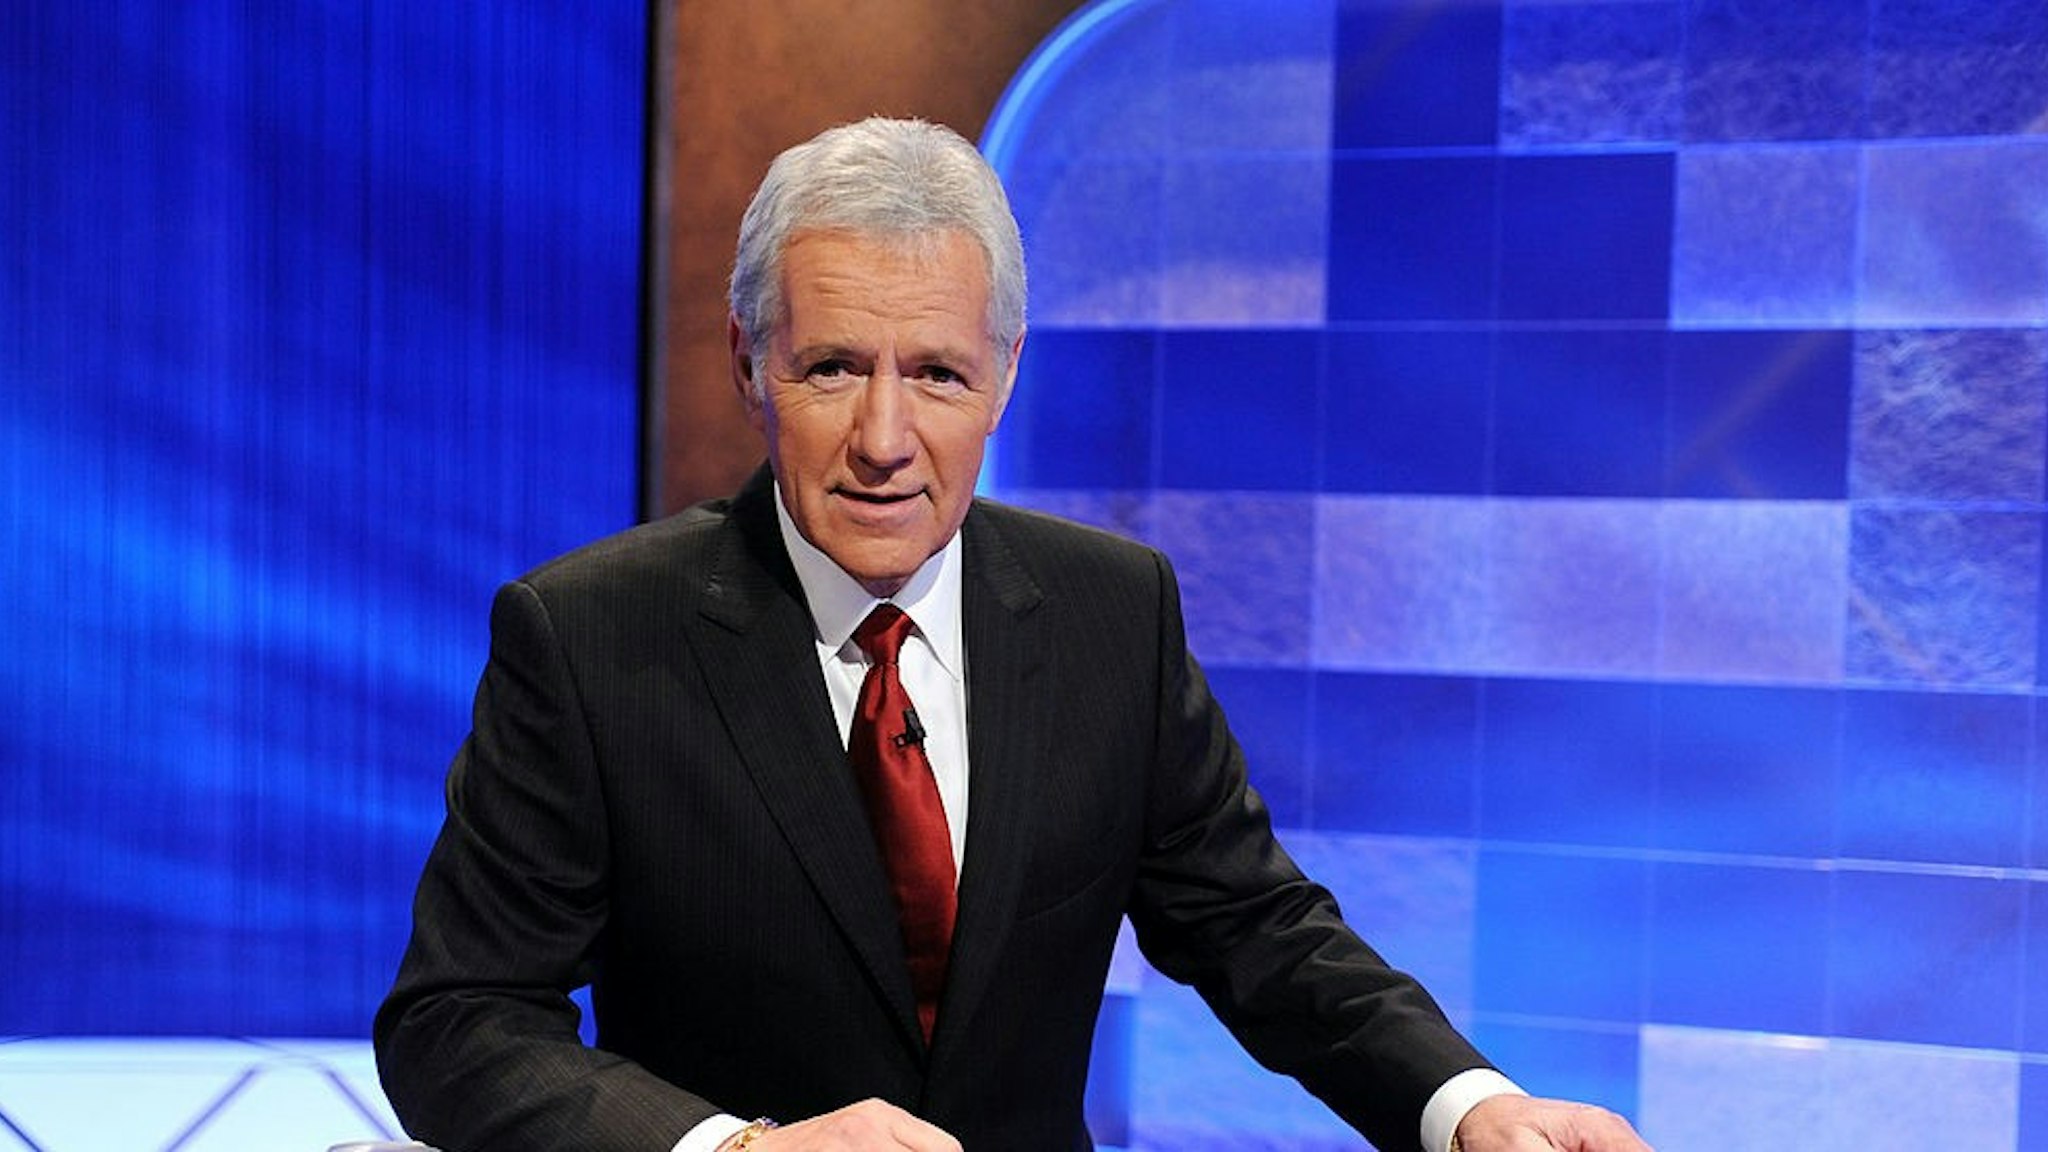 CULVER CITY, CA - APRIL 17: Game show host Alex Trebek poses on the set of the "Jeopardy!" Million Dollar Celebrity Invitational Tournament Show Taping on April 17, 2010 in Culver City, California. (Photo b